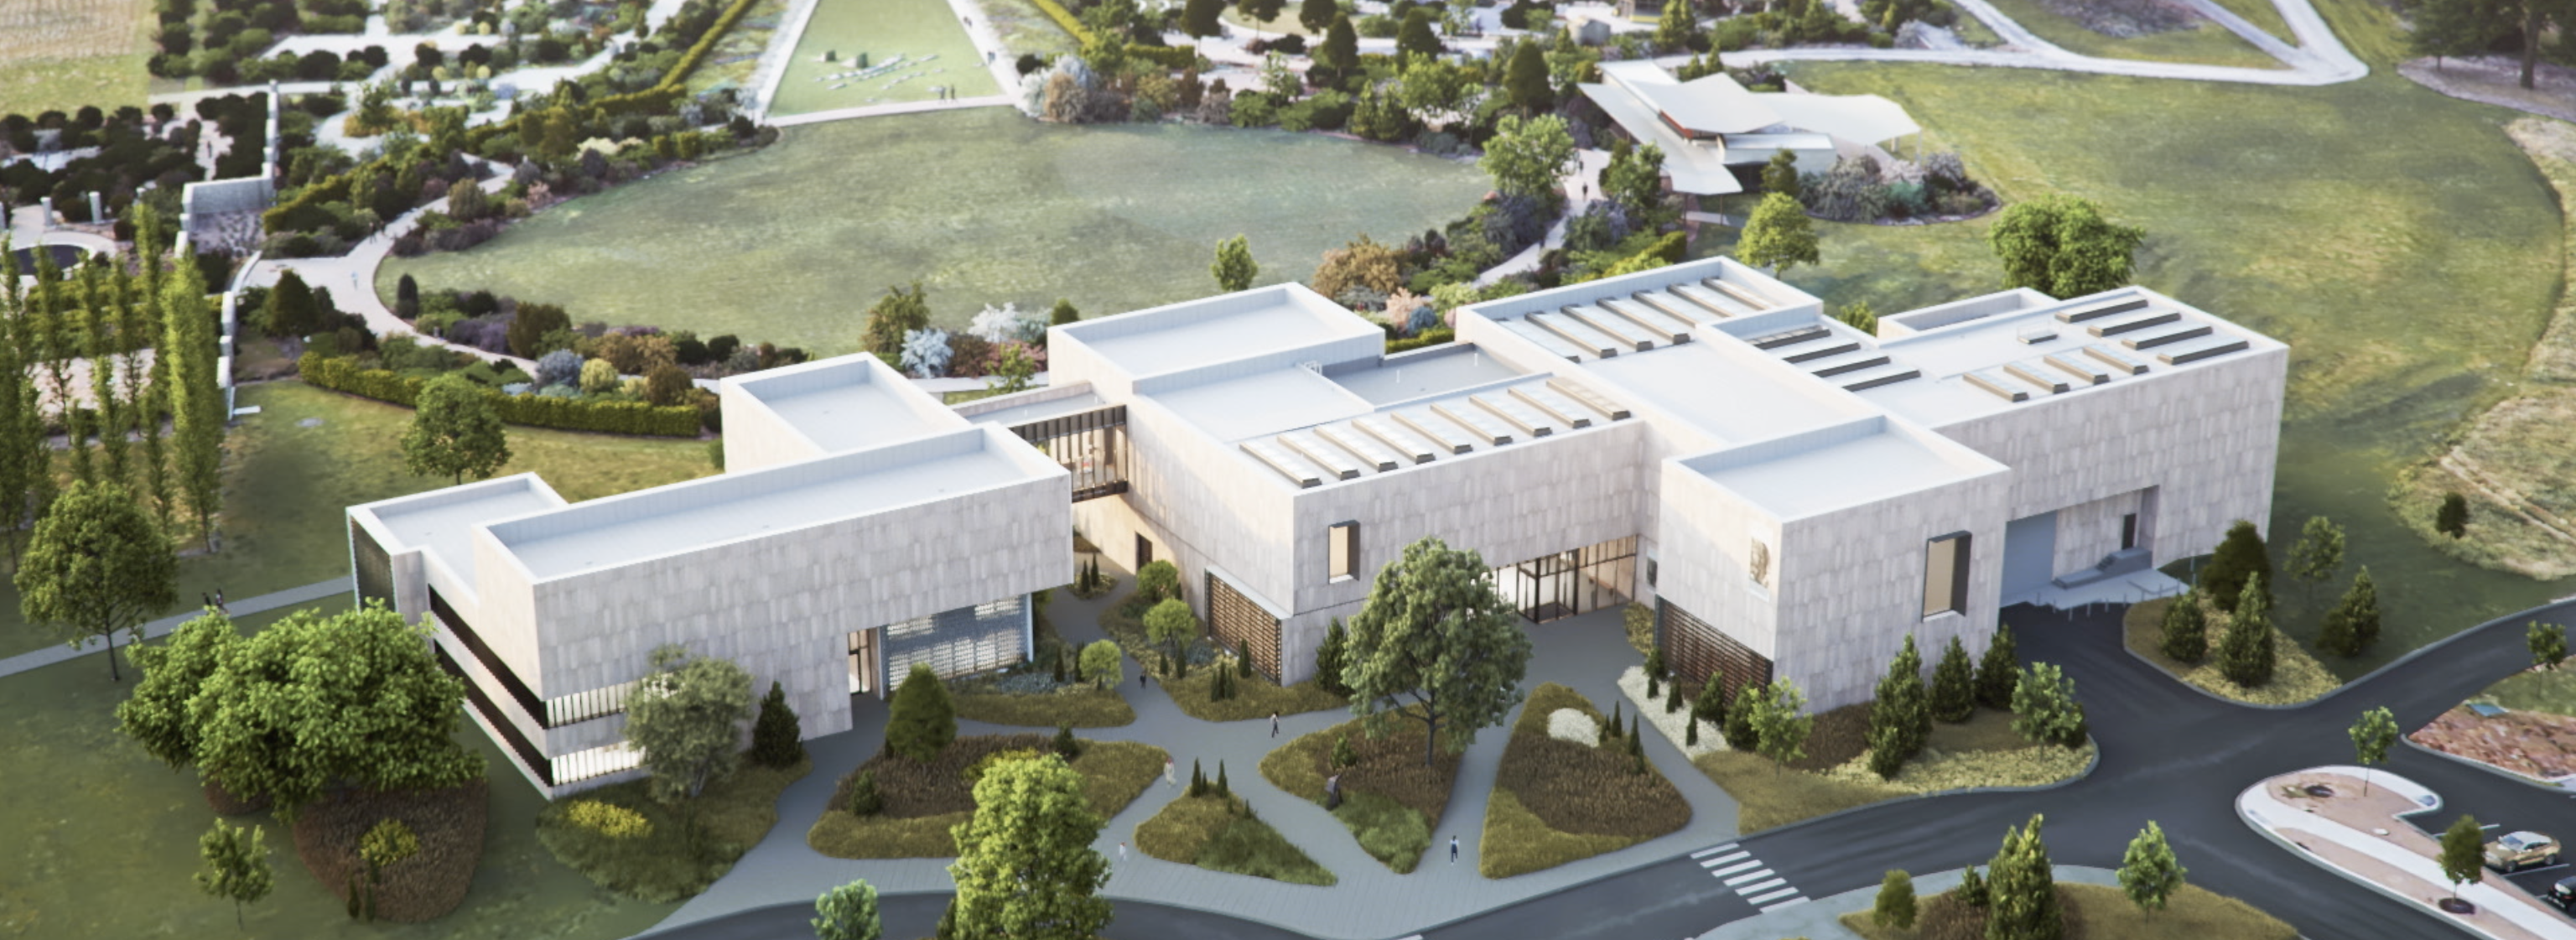 Overhead view of the new Palmer Museum of Art depicted in a 3D animation fly-through. Image by Allied Works | Rendering courtesy Brooklyn Digital Foundry